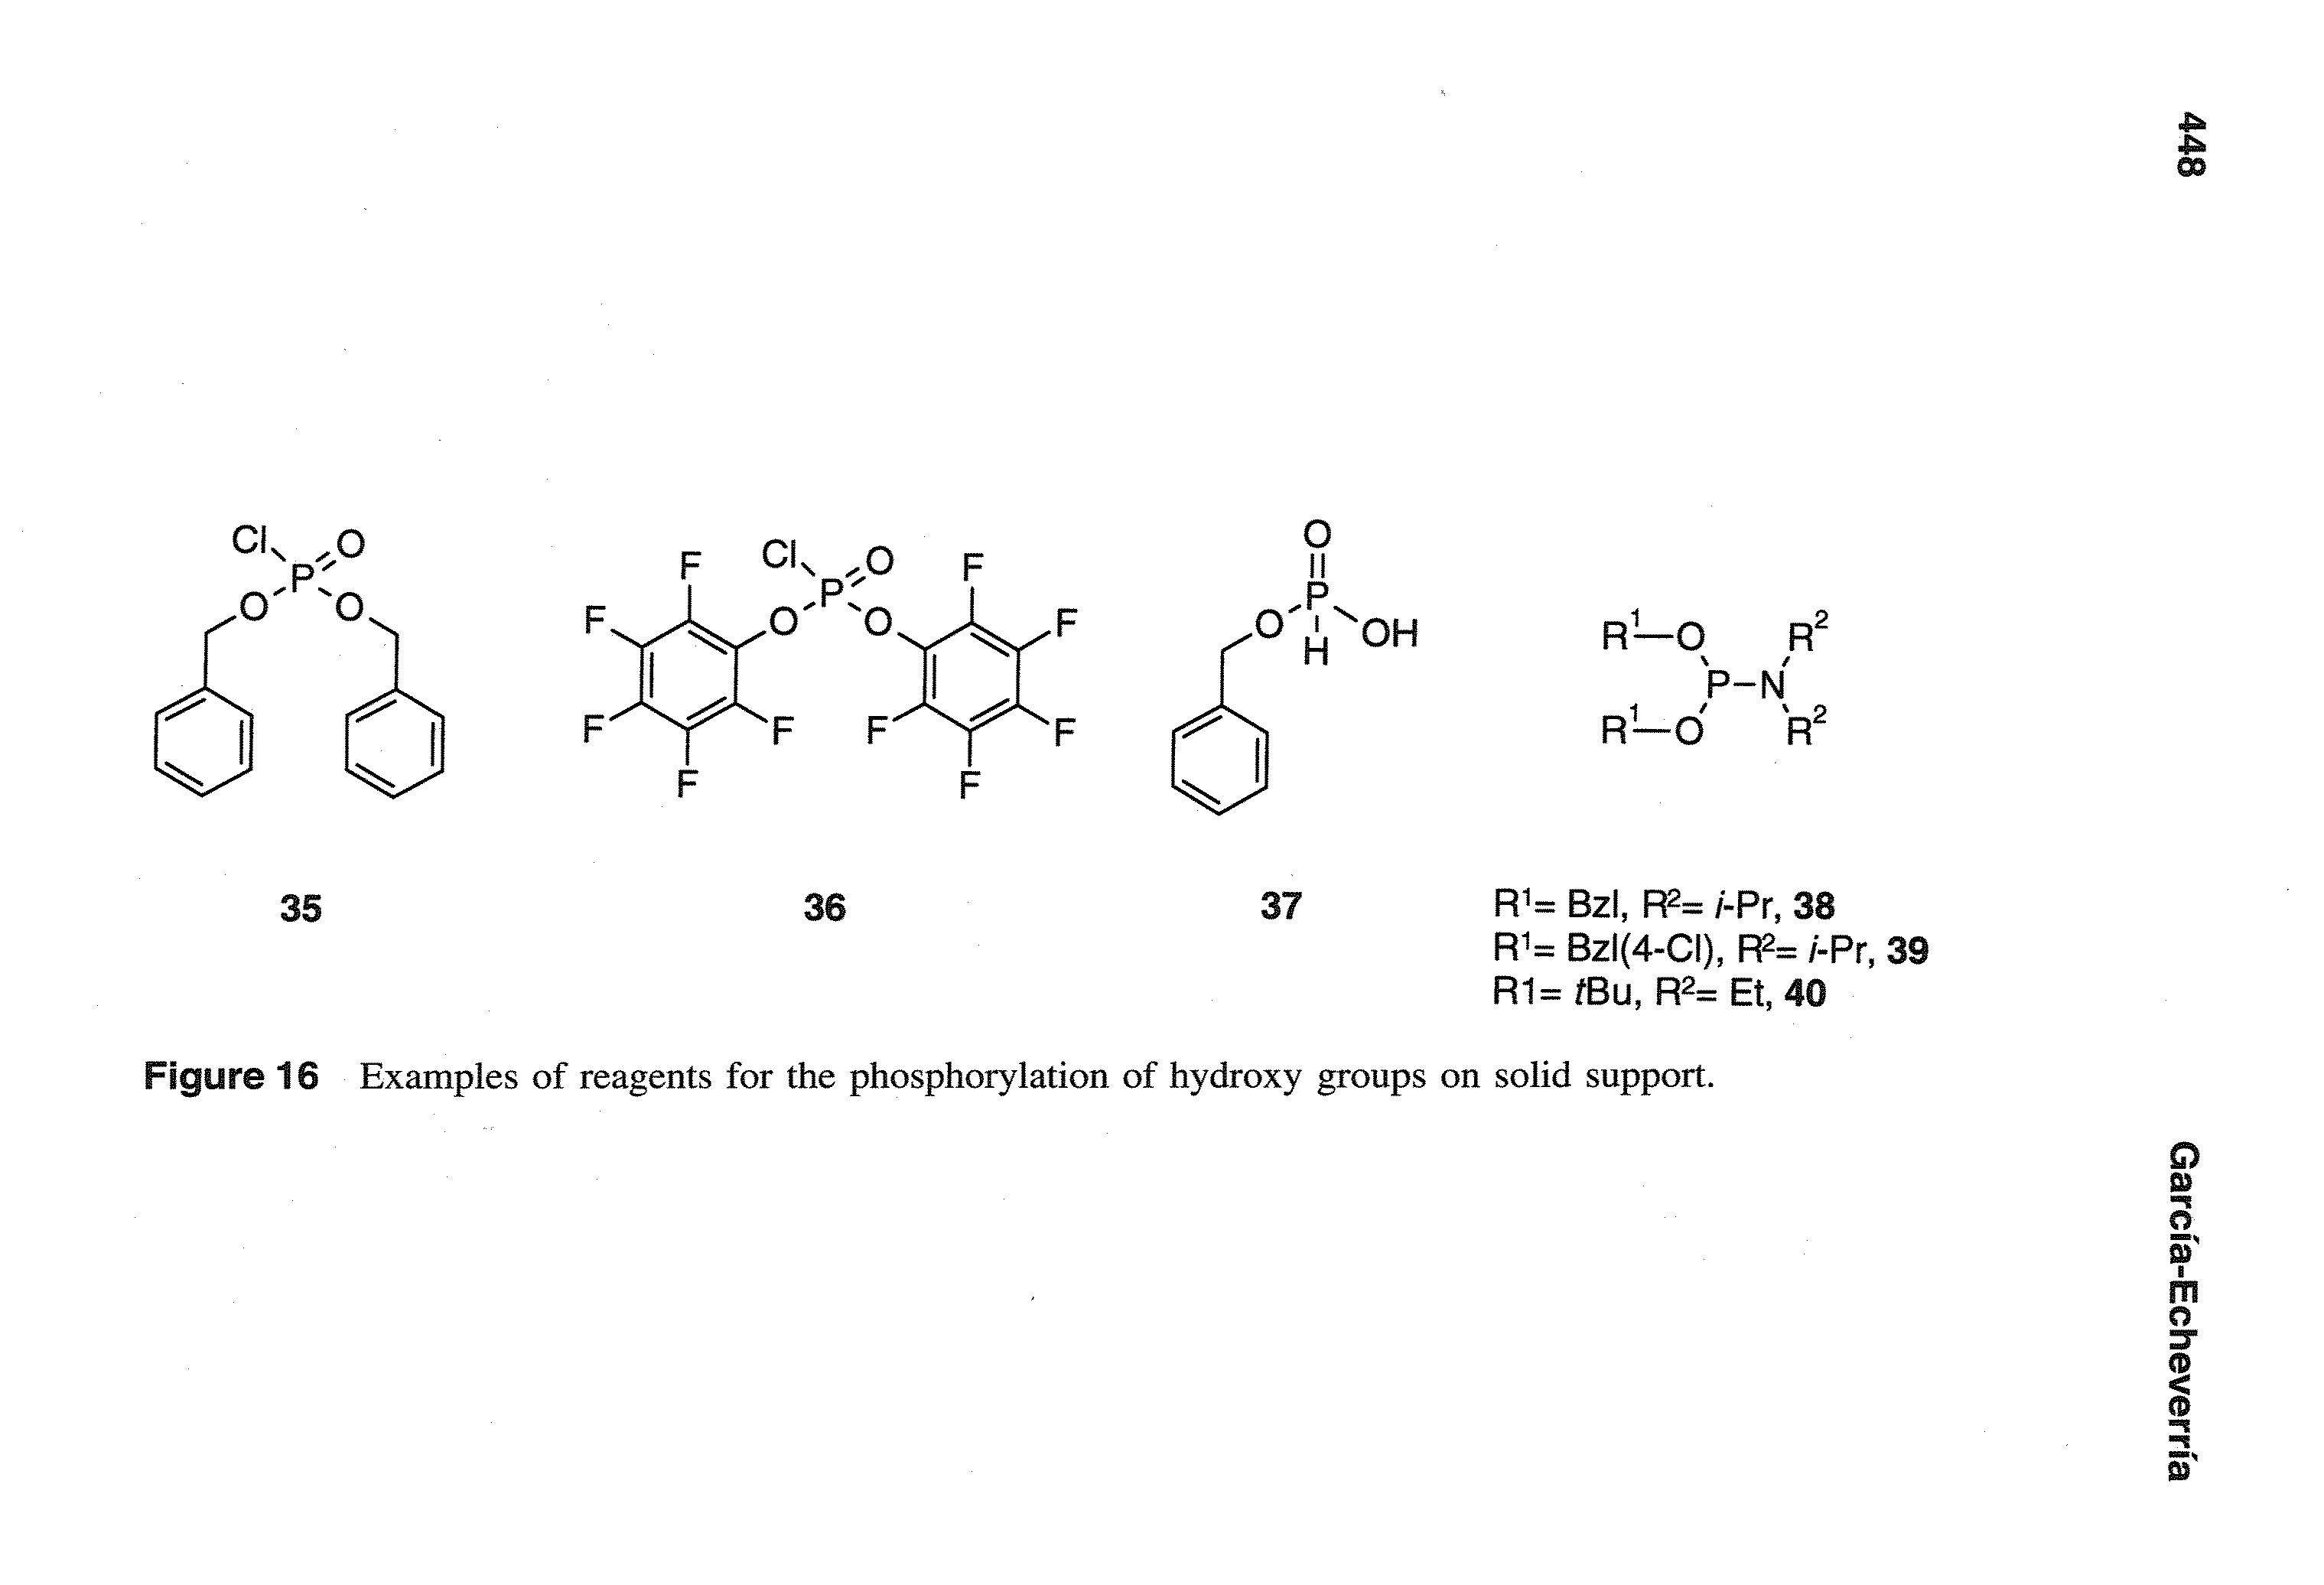 Figure 16 Examples of reagents for the phosphorylation of hydroxy groups on solid support.